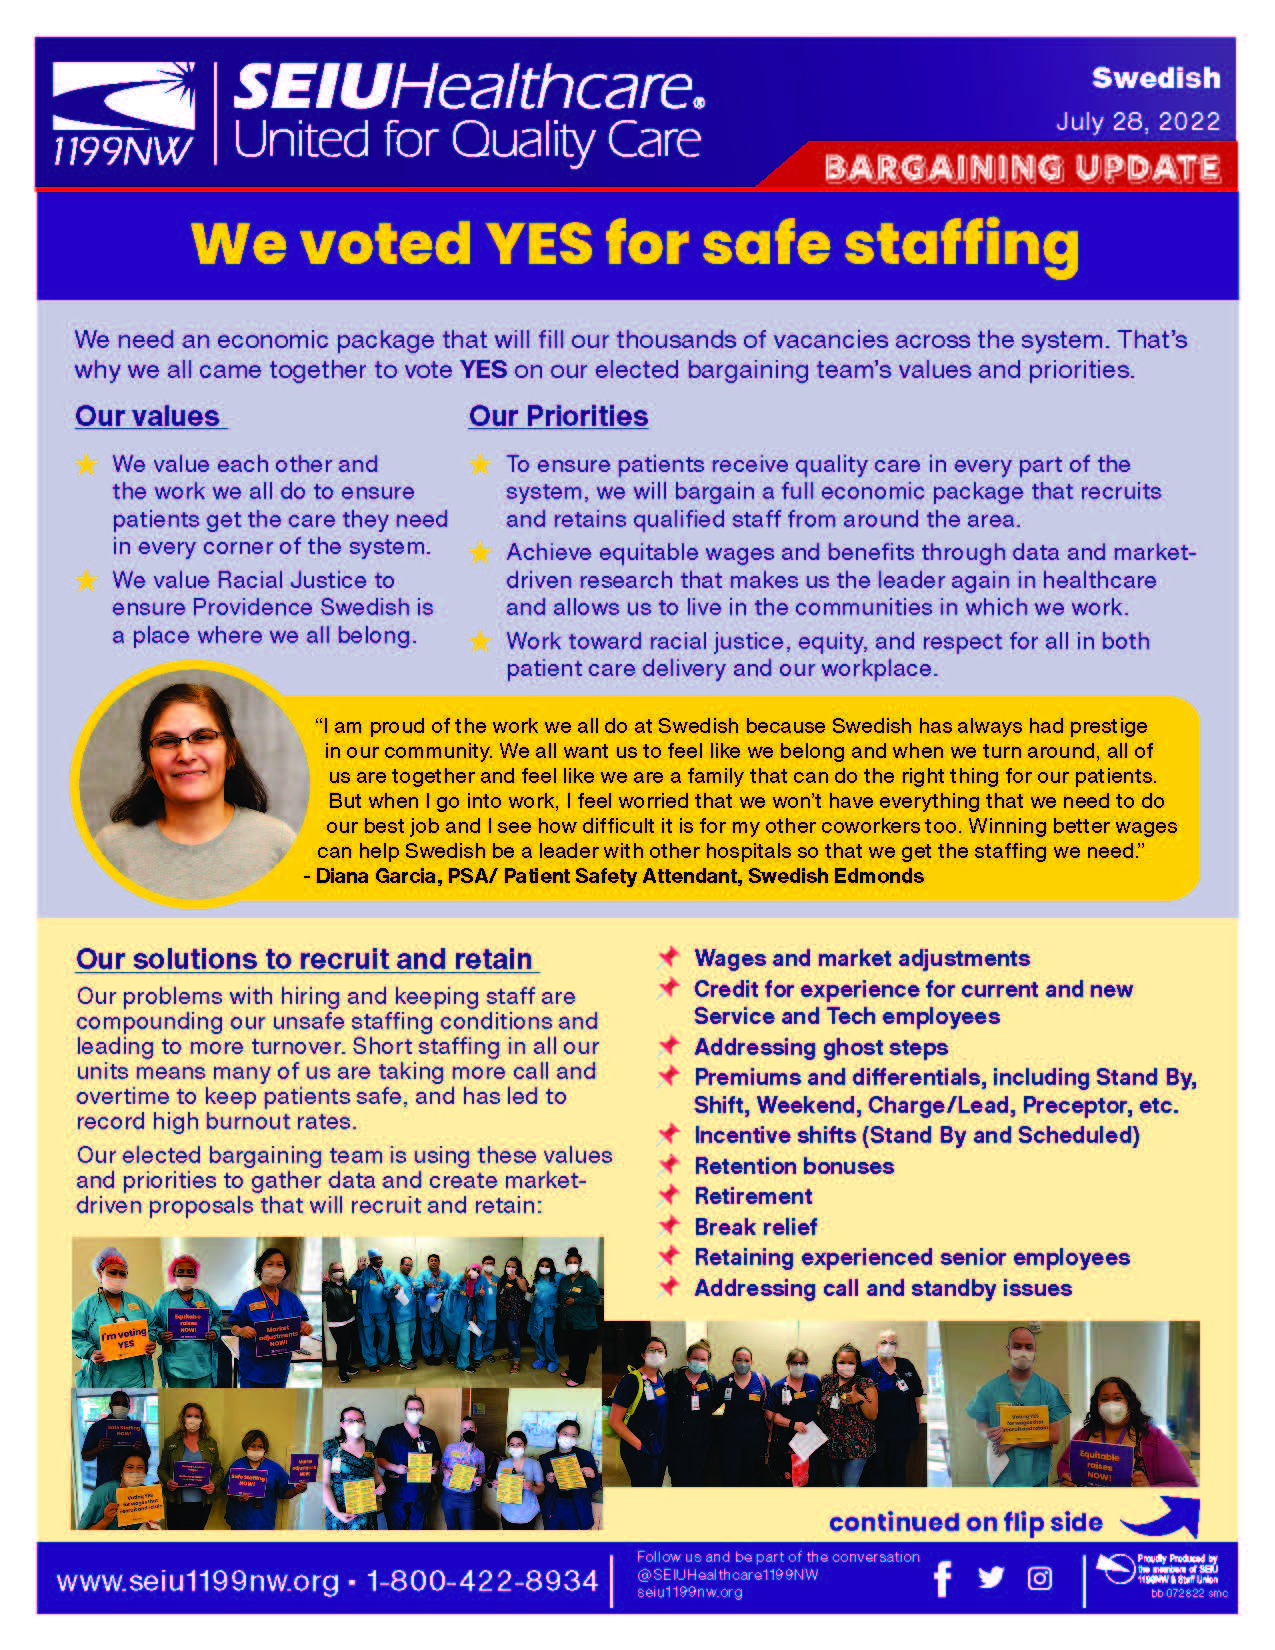 We voted YES for safe staffing